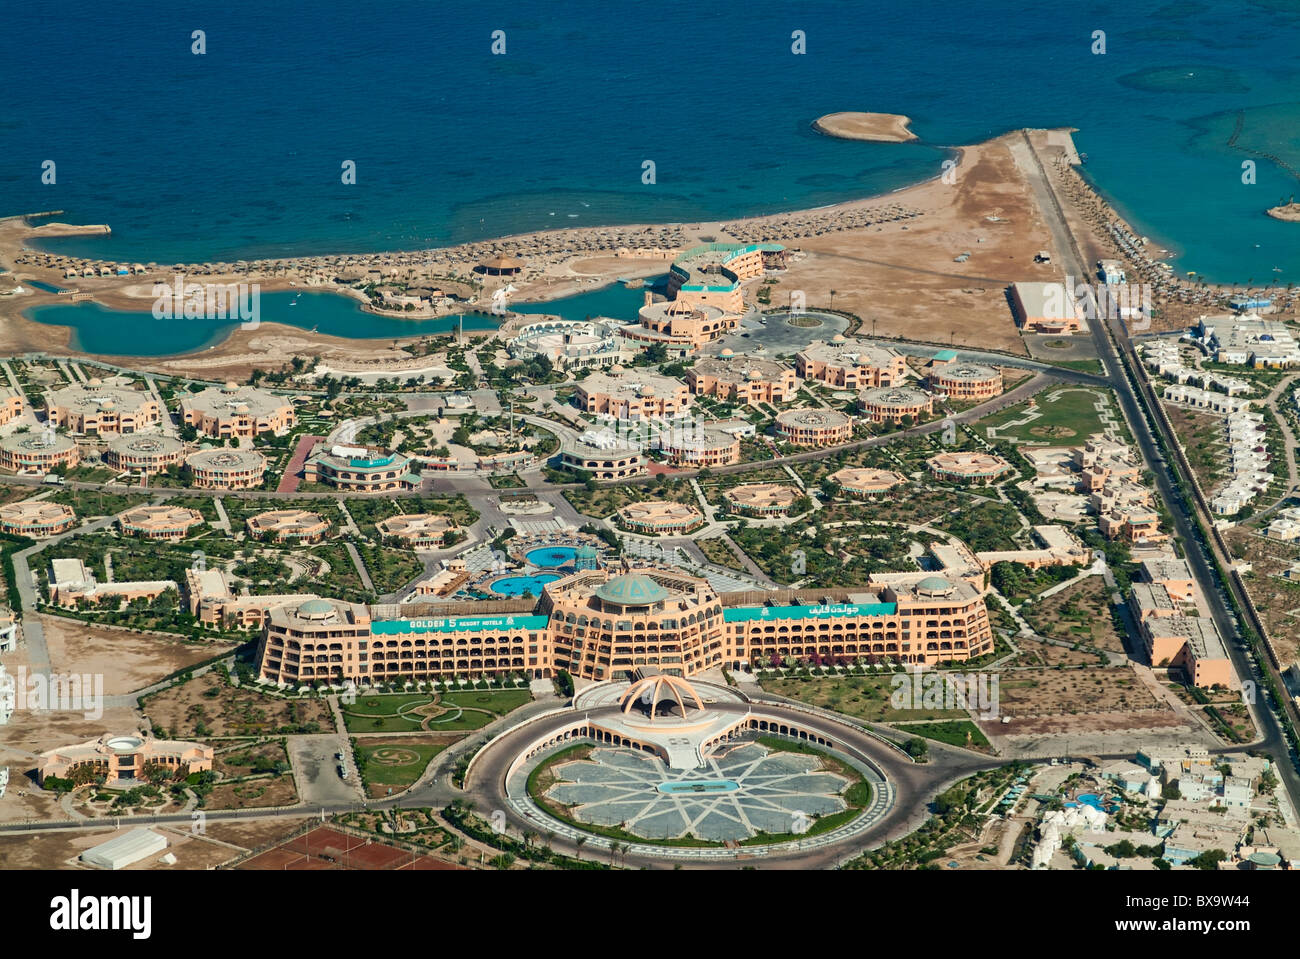 View of coastal luxury hotels resorts in Hurghada, Red Sea, Egypt - aerial view of the Club Golden 5 star hotel and resort Stock Photo